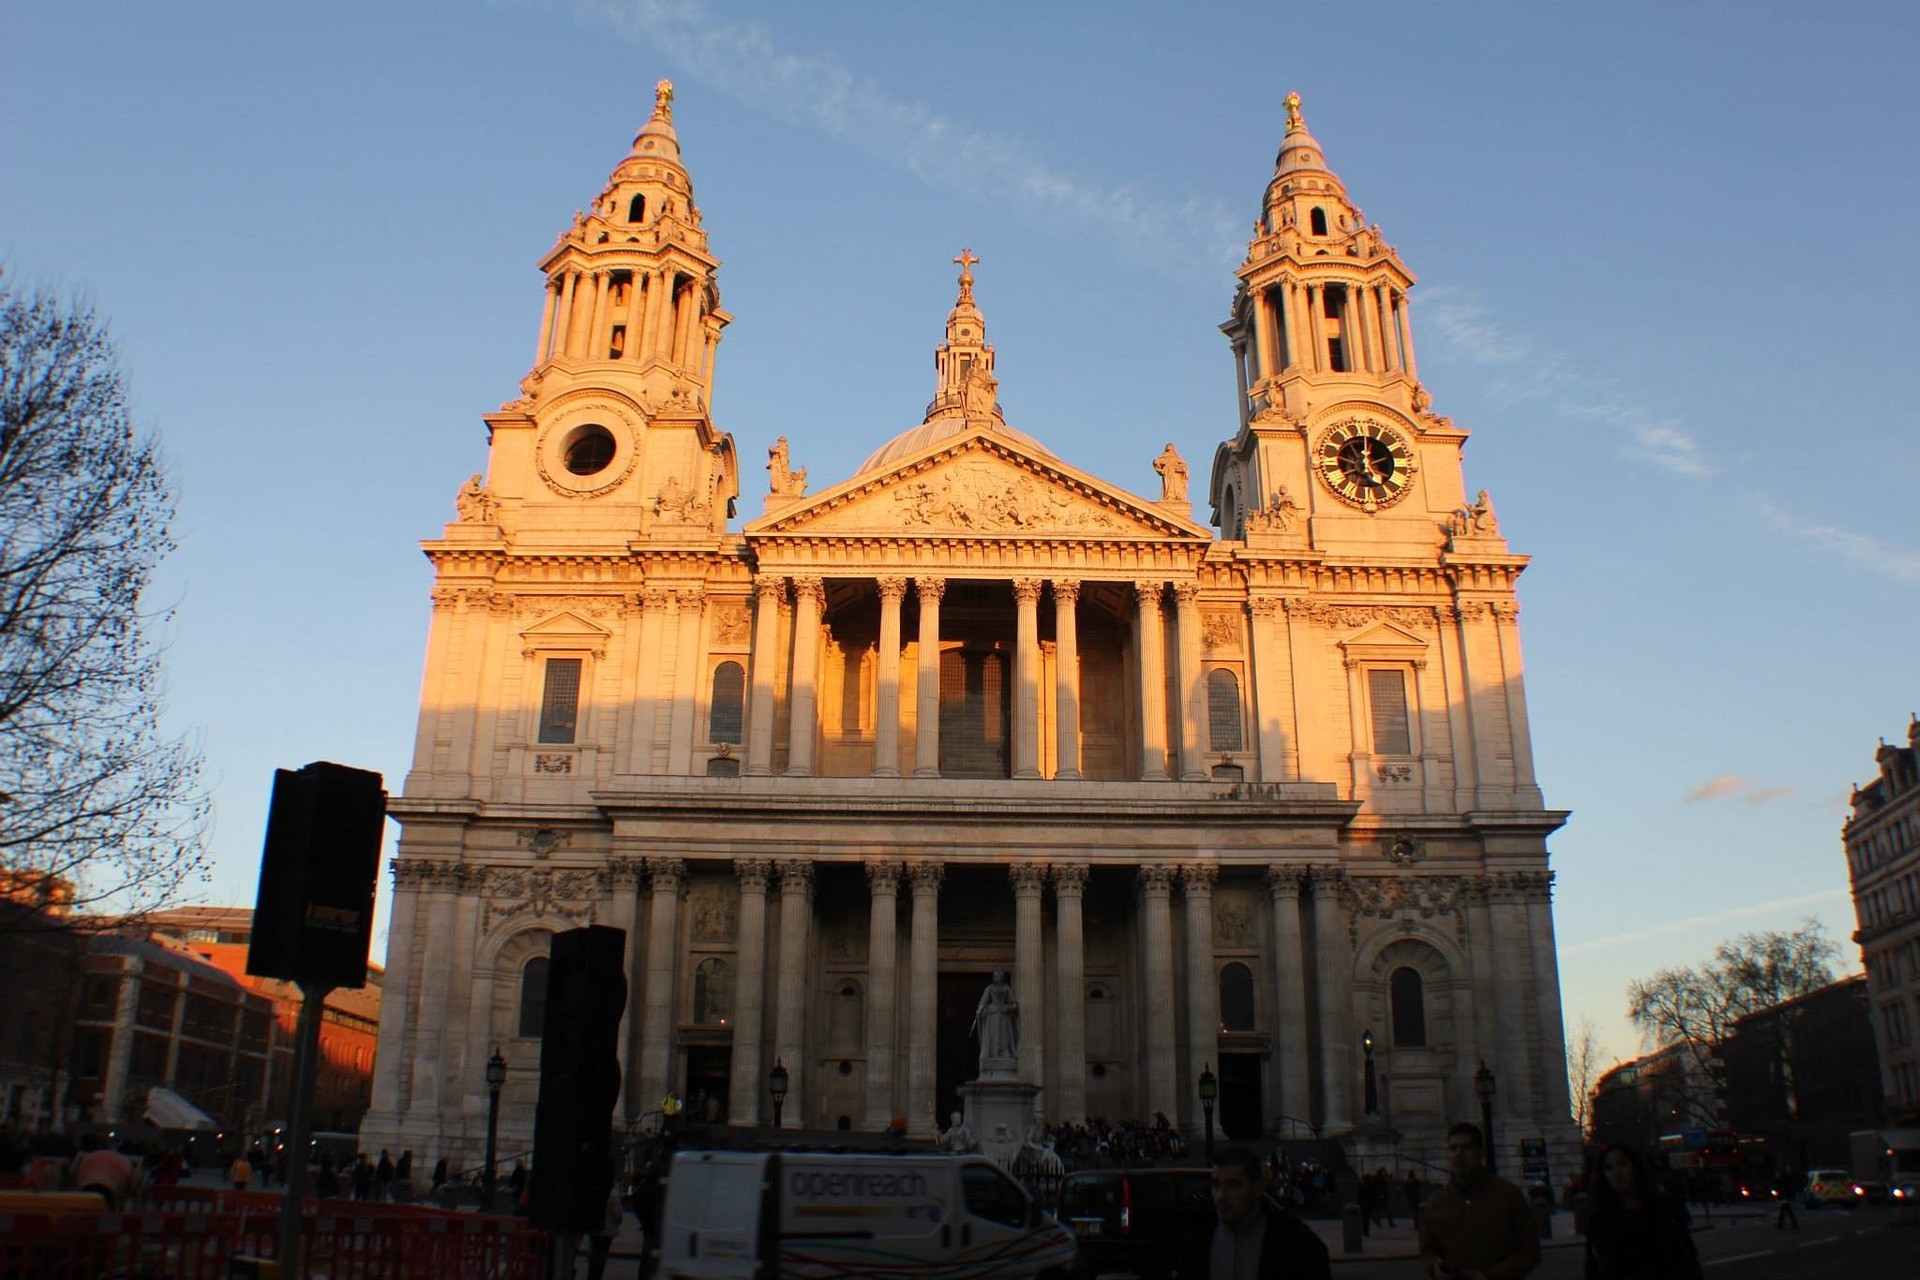 St. Paul's Cathedral, London: All year